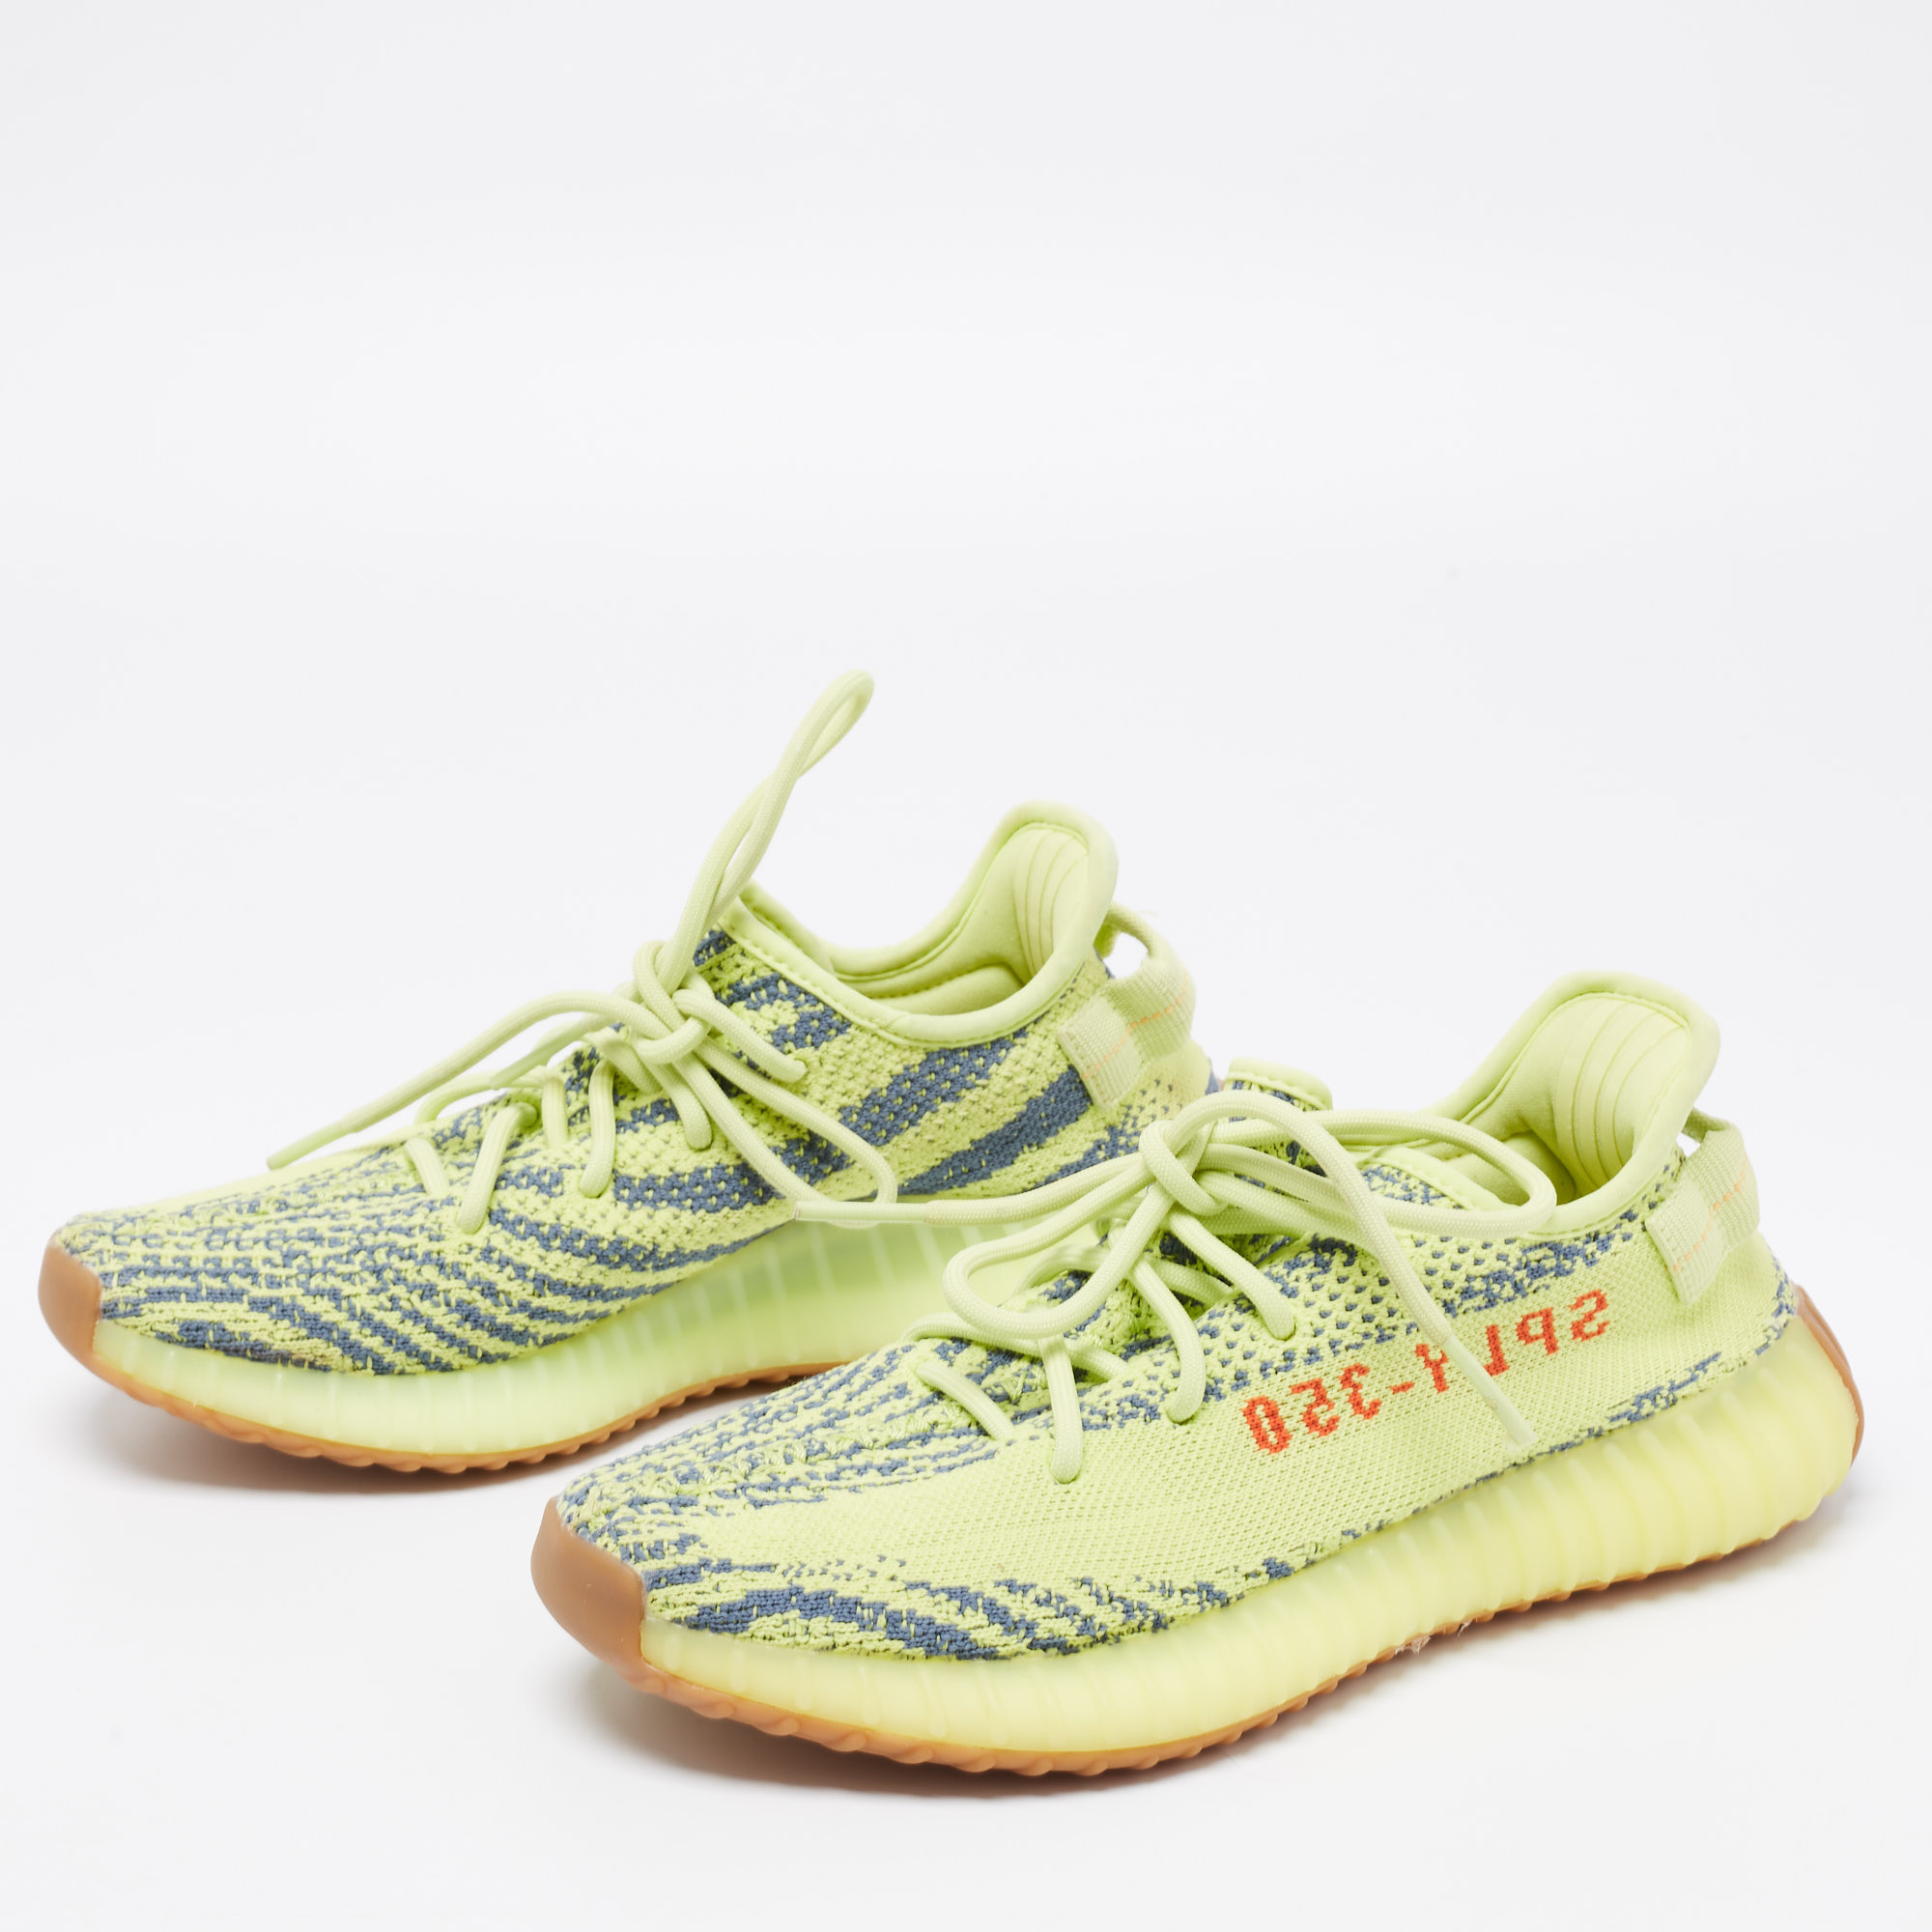 

Yeezy x Adidas Neon Yellow Knit Fabric Boost 350 V2 Semi Frozen Low-Top Sneakers Size 39 1/3